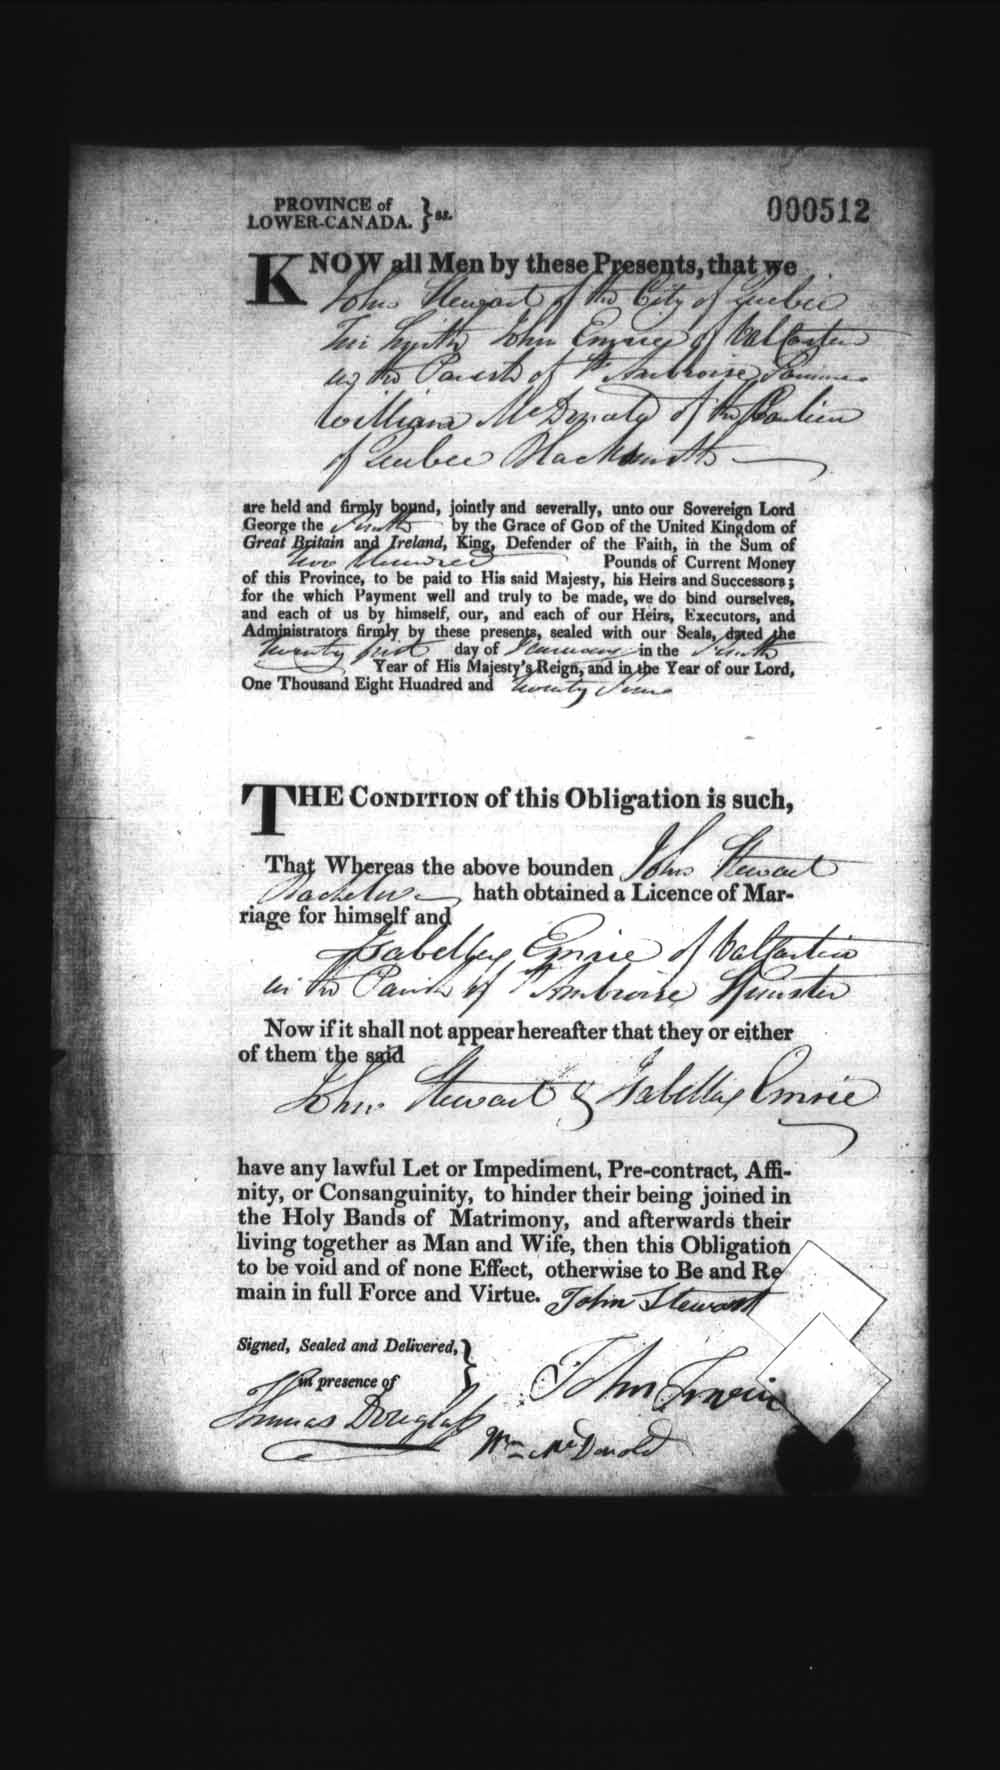 Digitized page of Upper and Lower Canada Marriage Bonds (1779-1865) for Image No.: e008236430